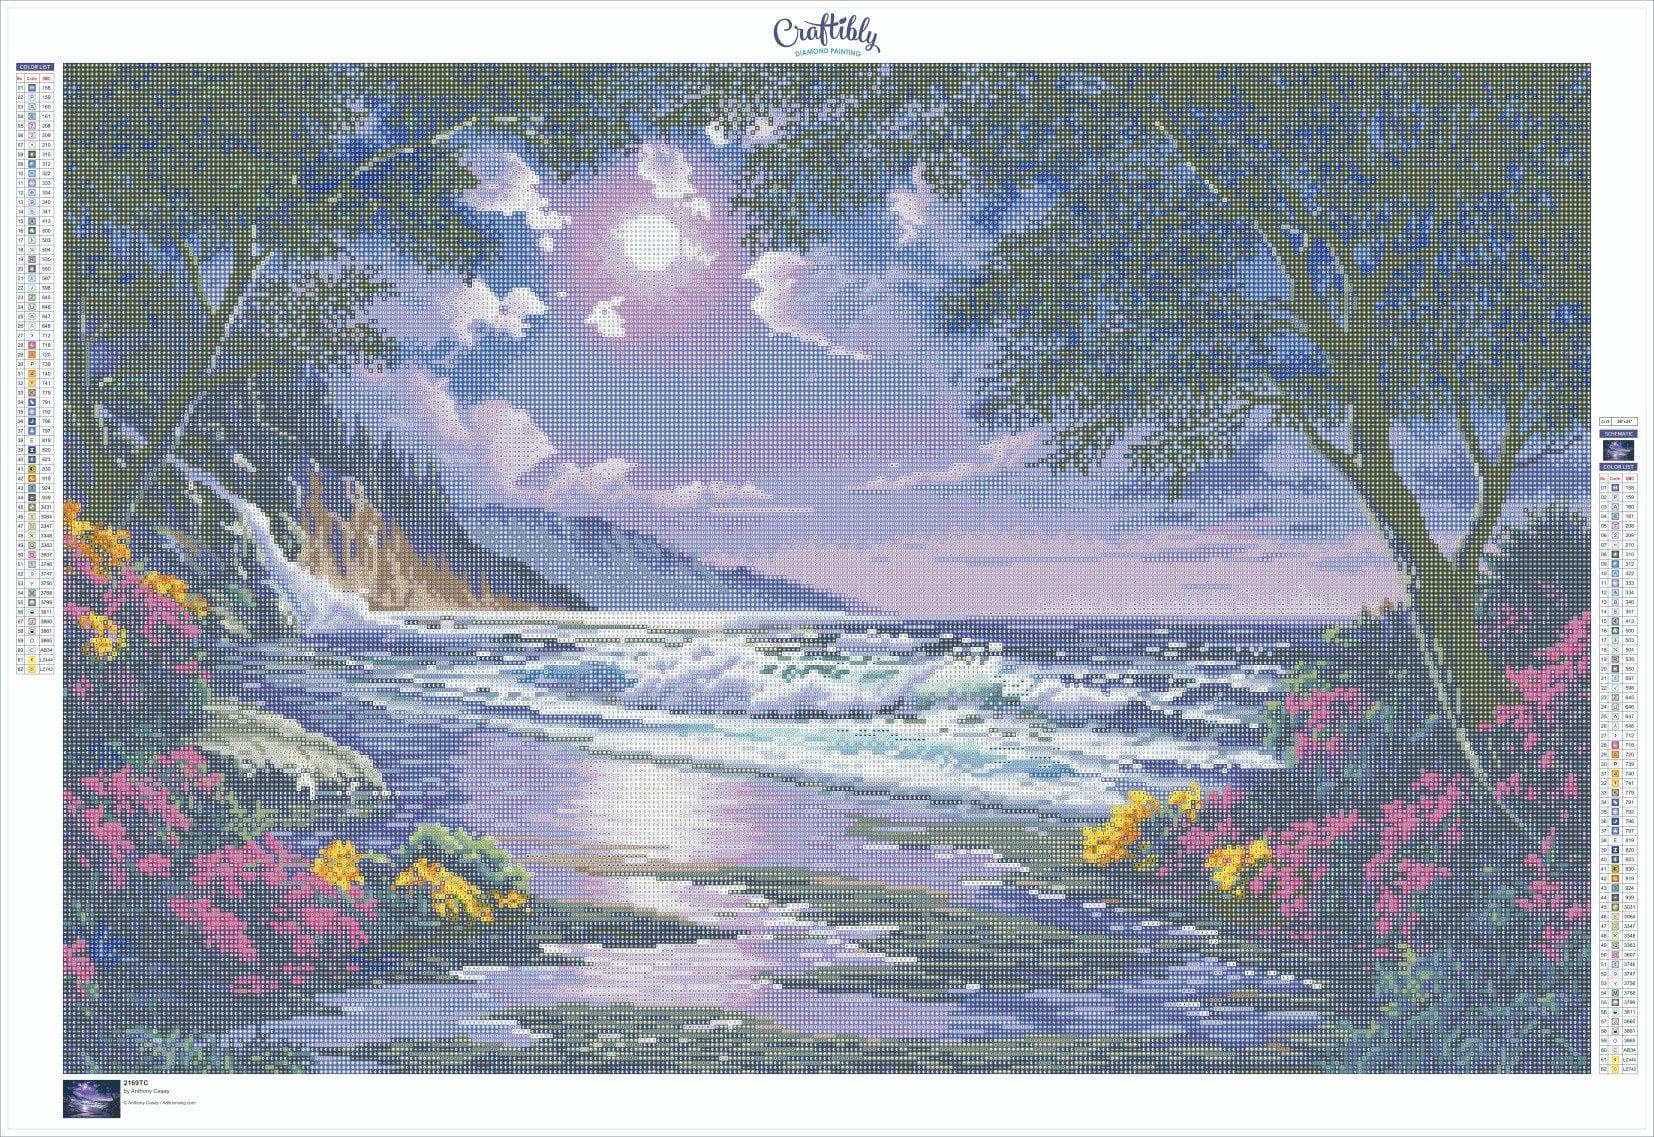 Ravensburger Puzzle 3000 Piece Moonlight Beach Anthony Casay 1997